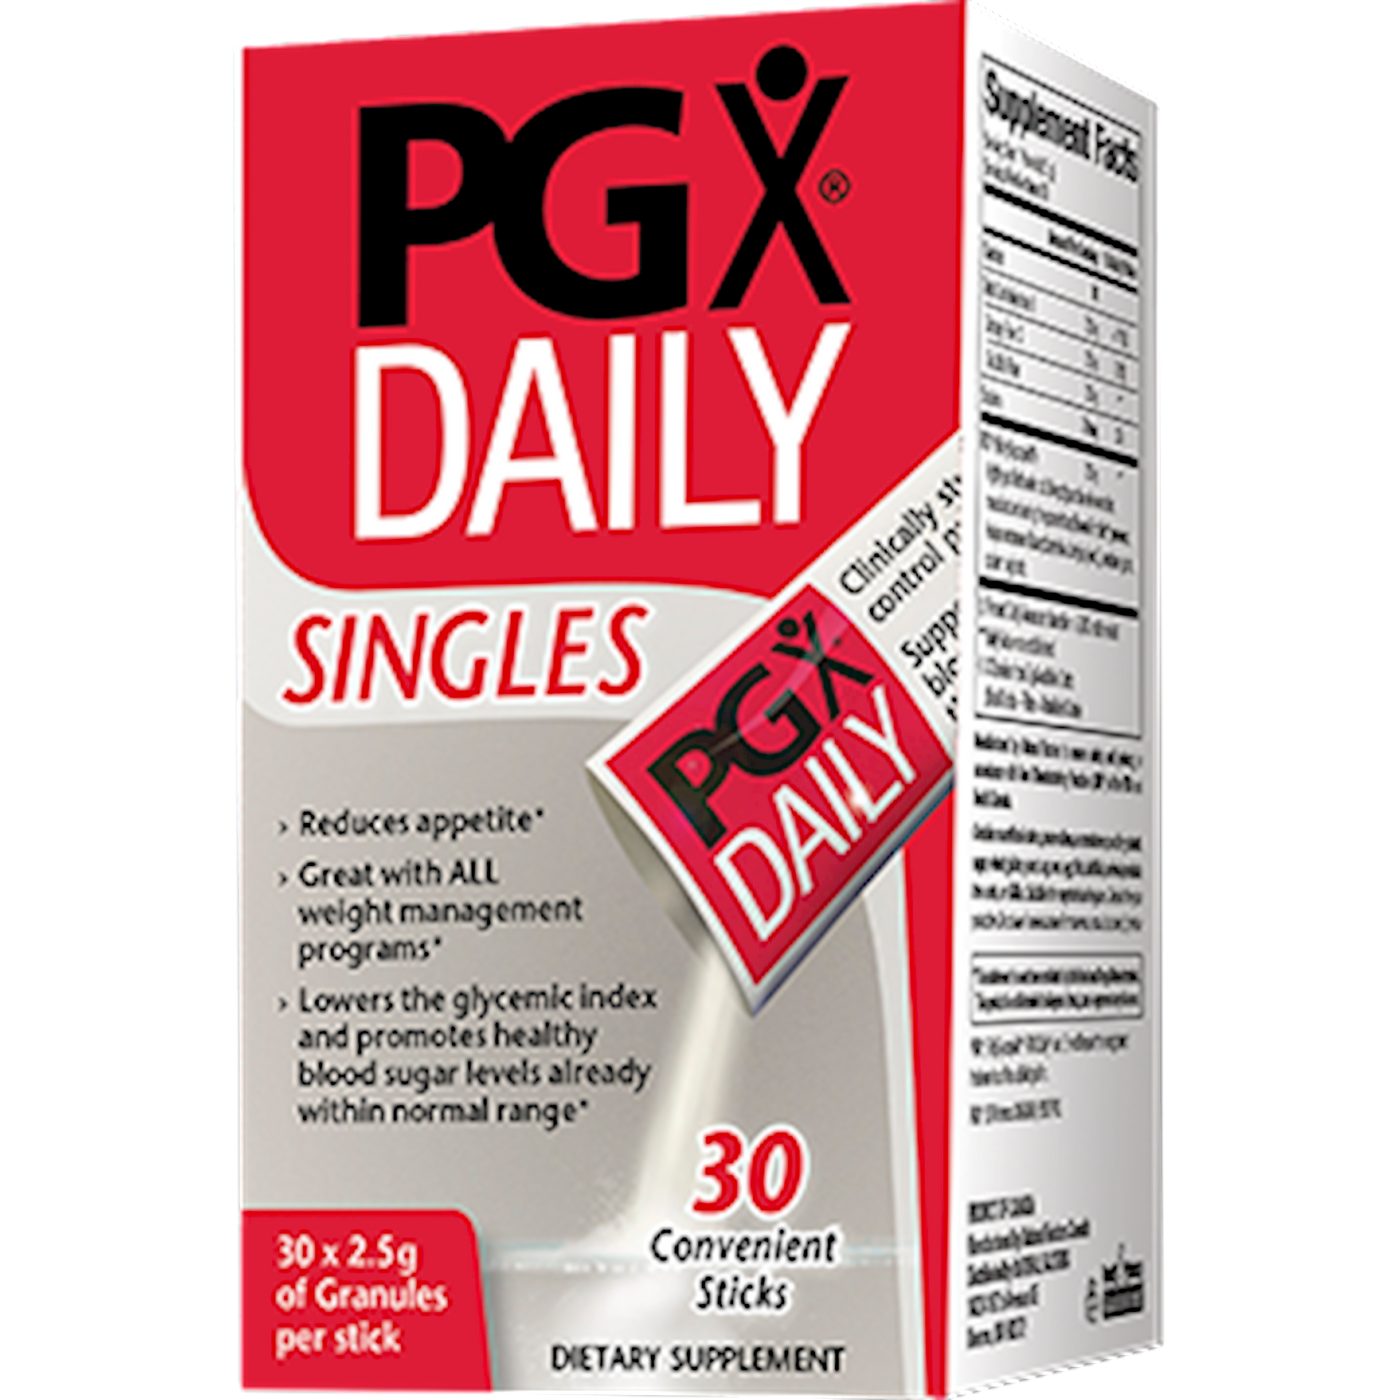 PGX Daily Singles s Curated Wellness